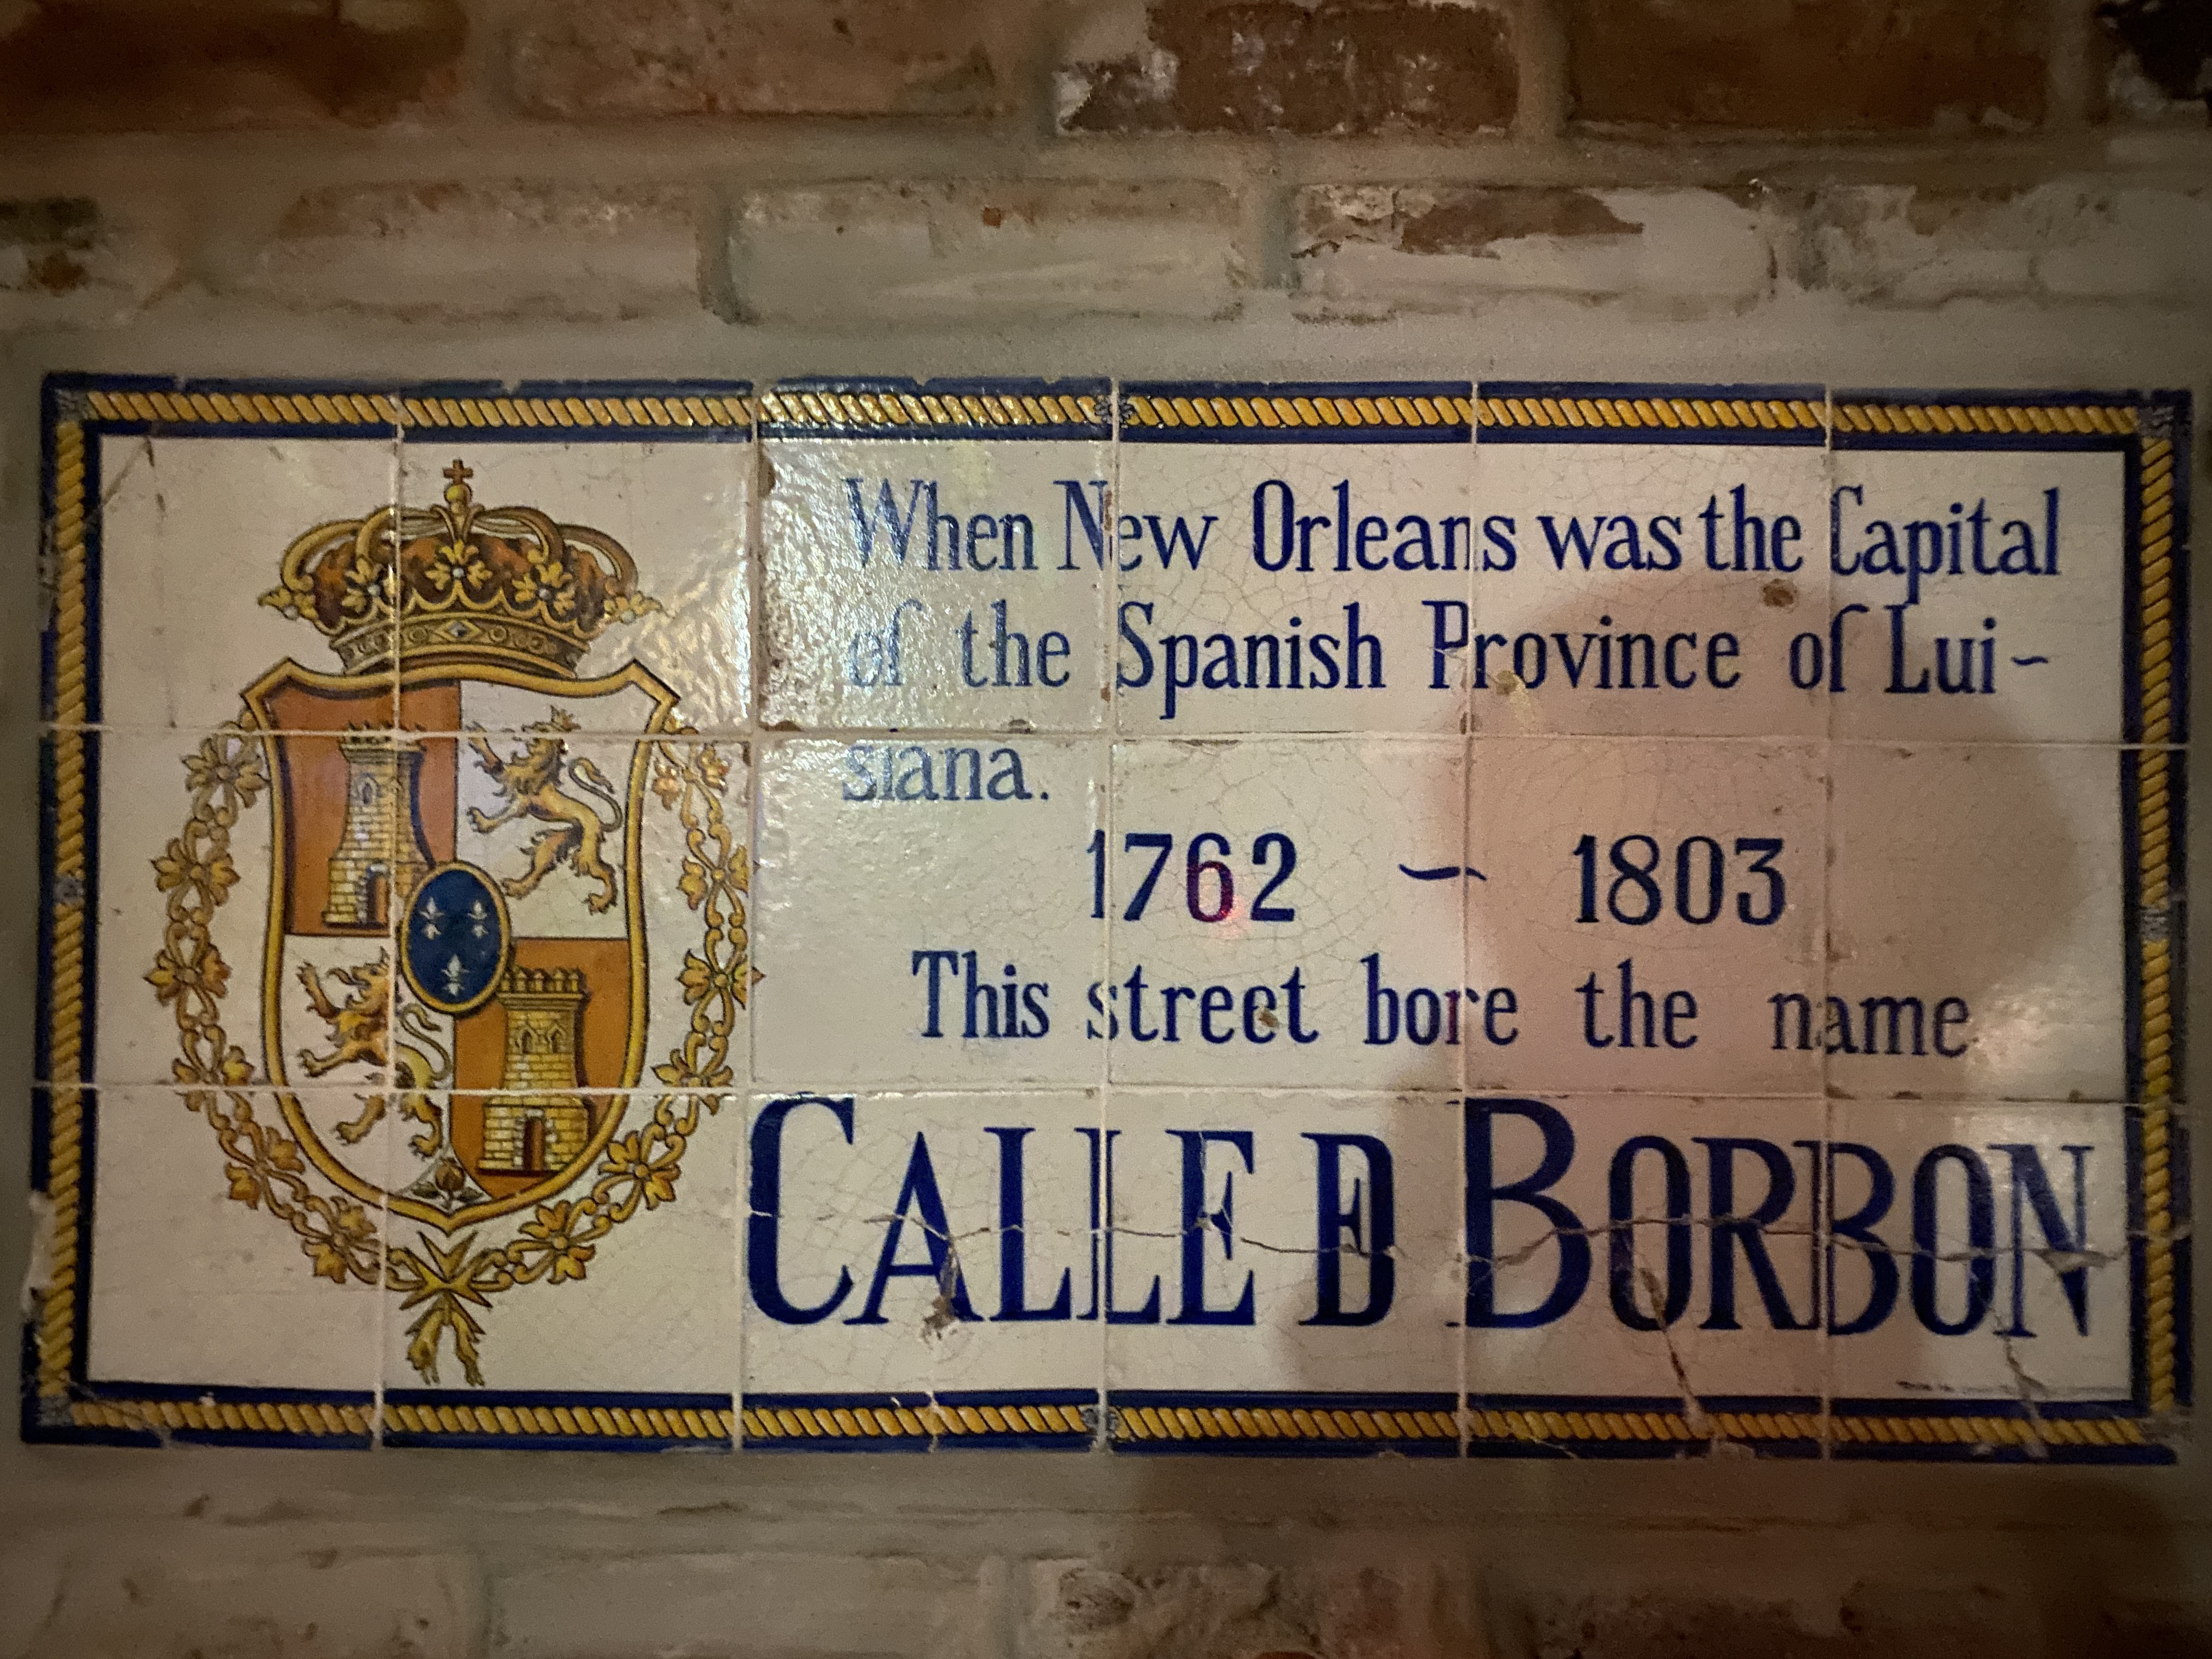 calle d borbon tiled street sign by sara rose (2021)